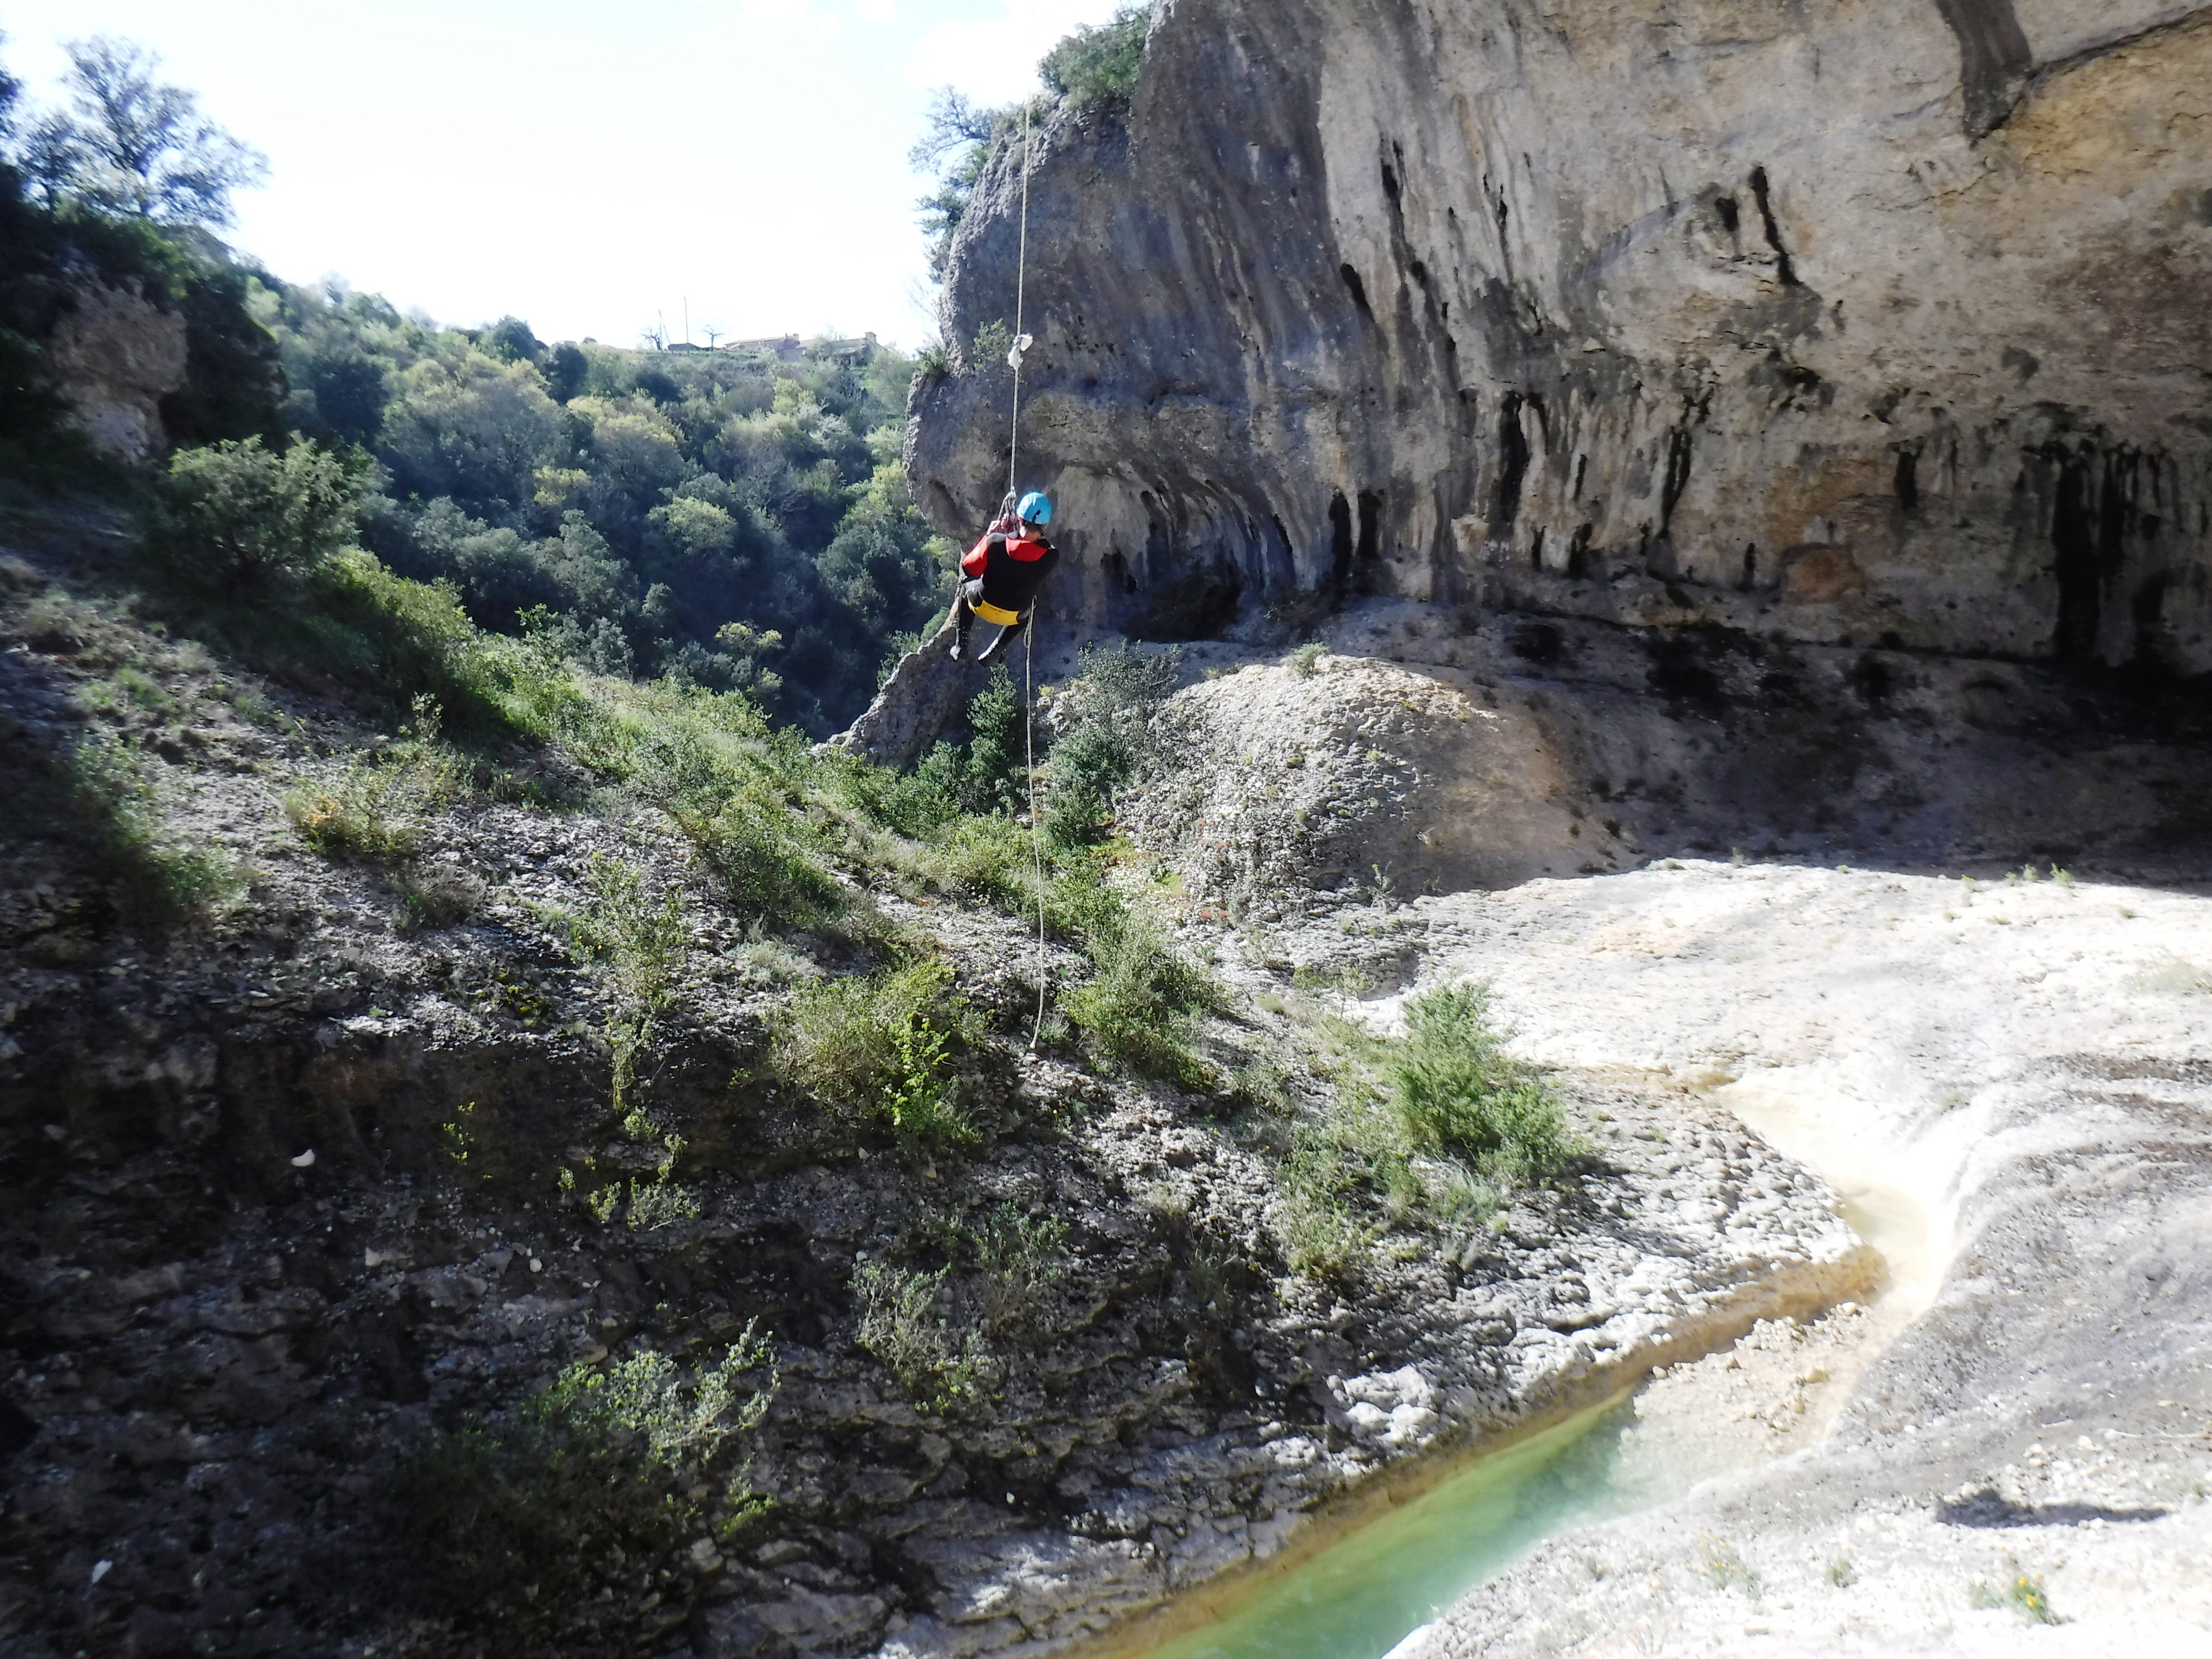 Canyoning de Rochecolombe avec Cîmes et Canyons